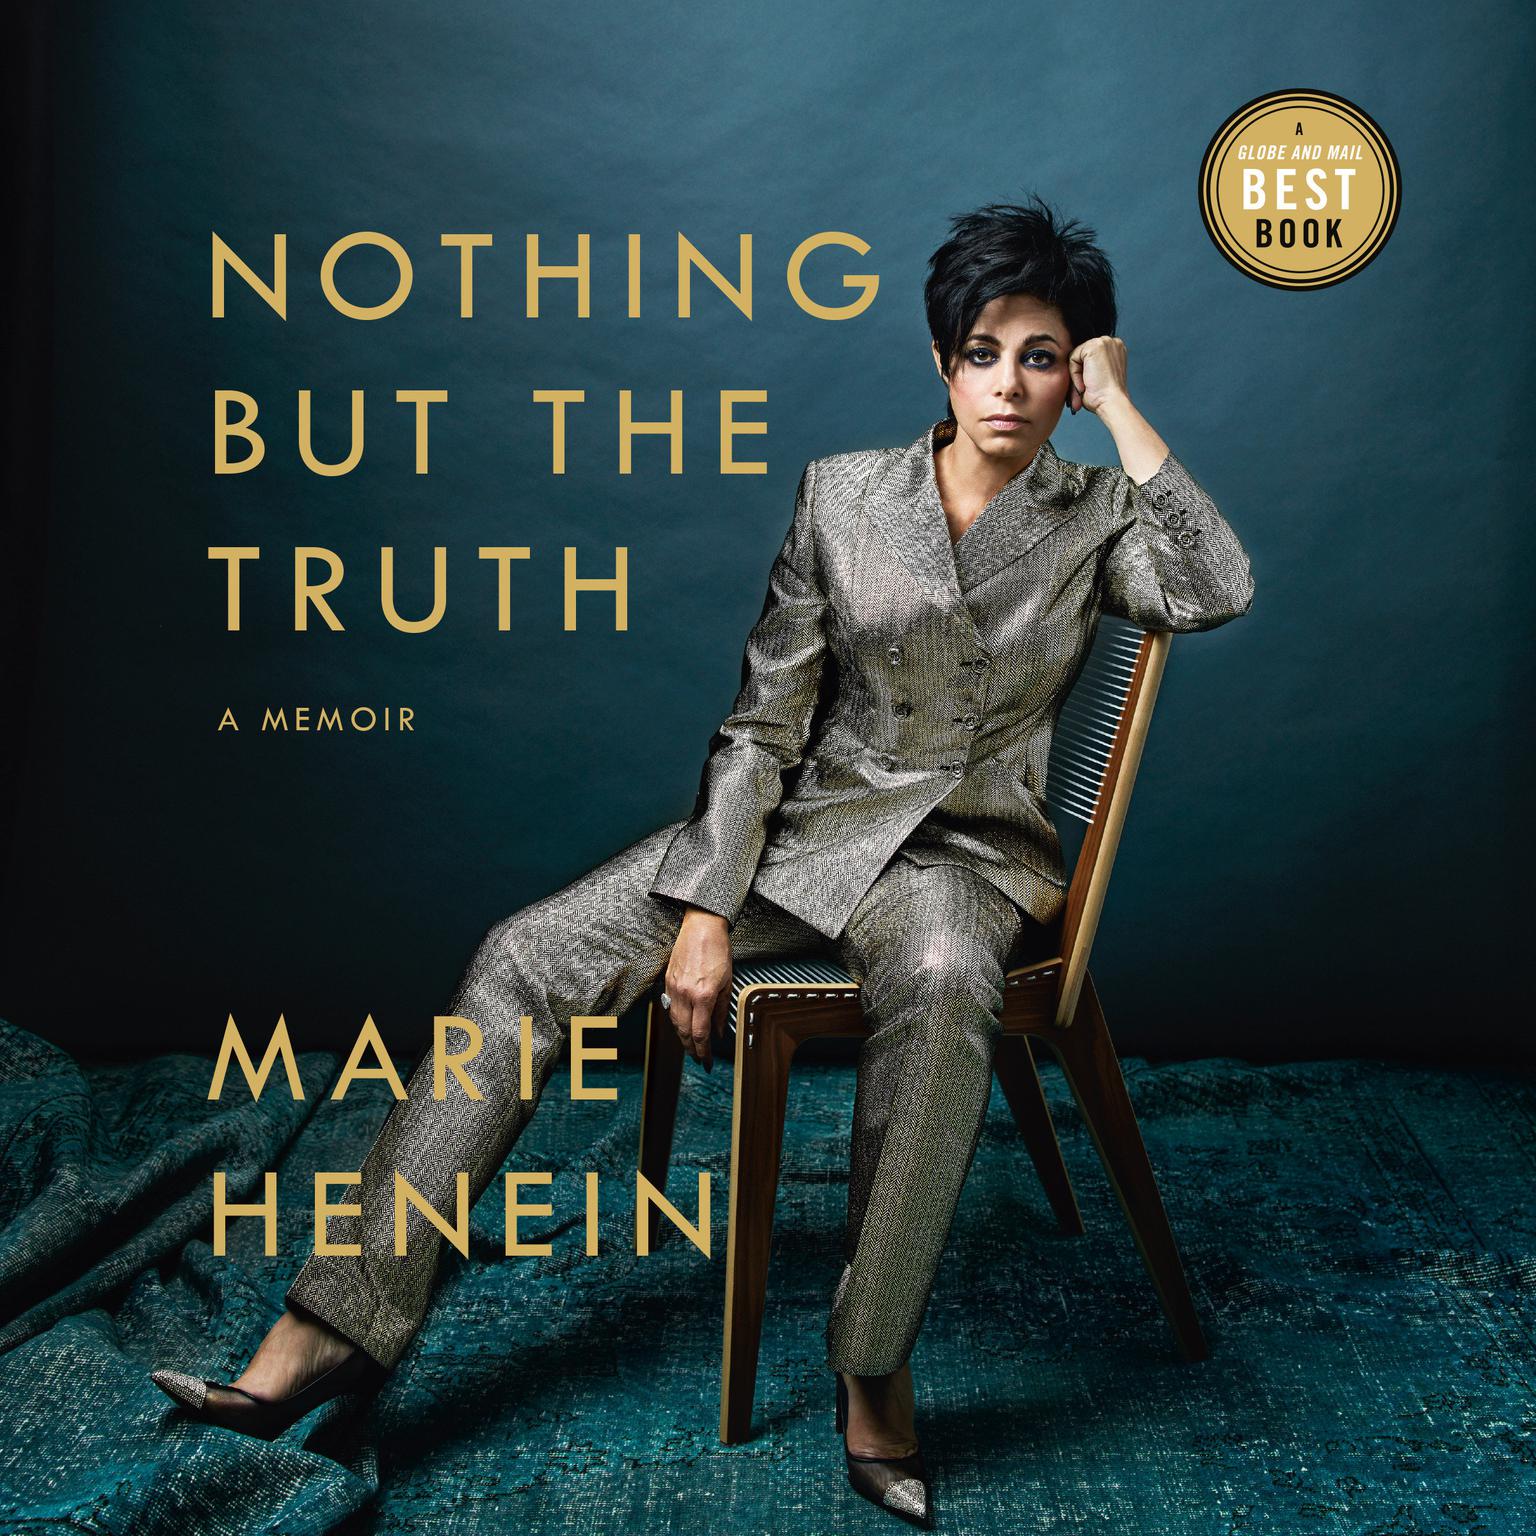 Nothing But the Truth: A Memoir Audiobook, by Marie Henein